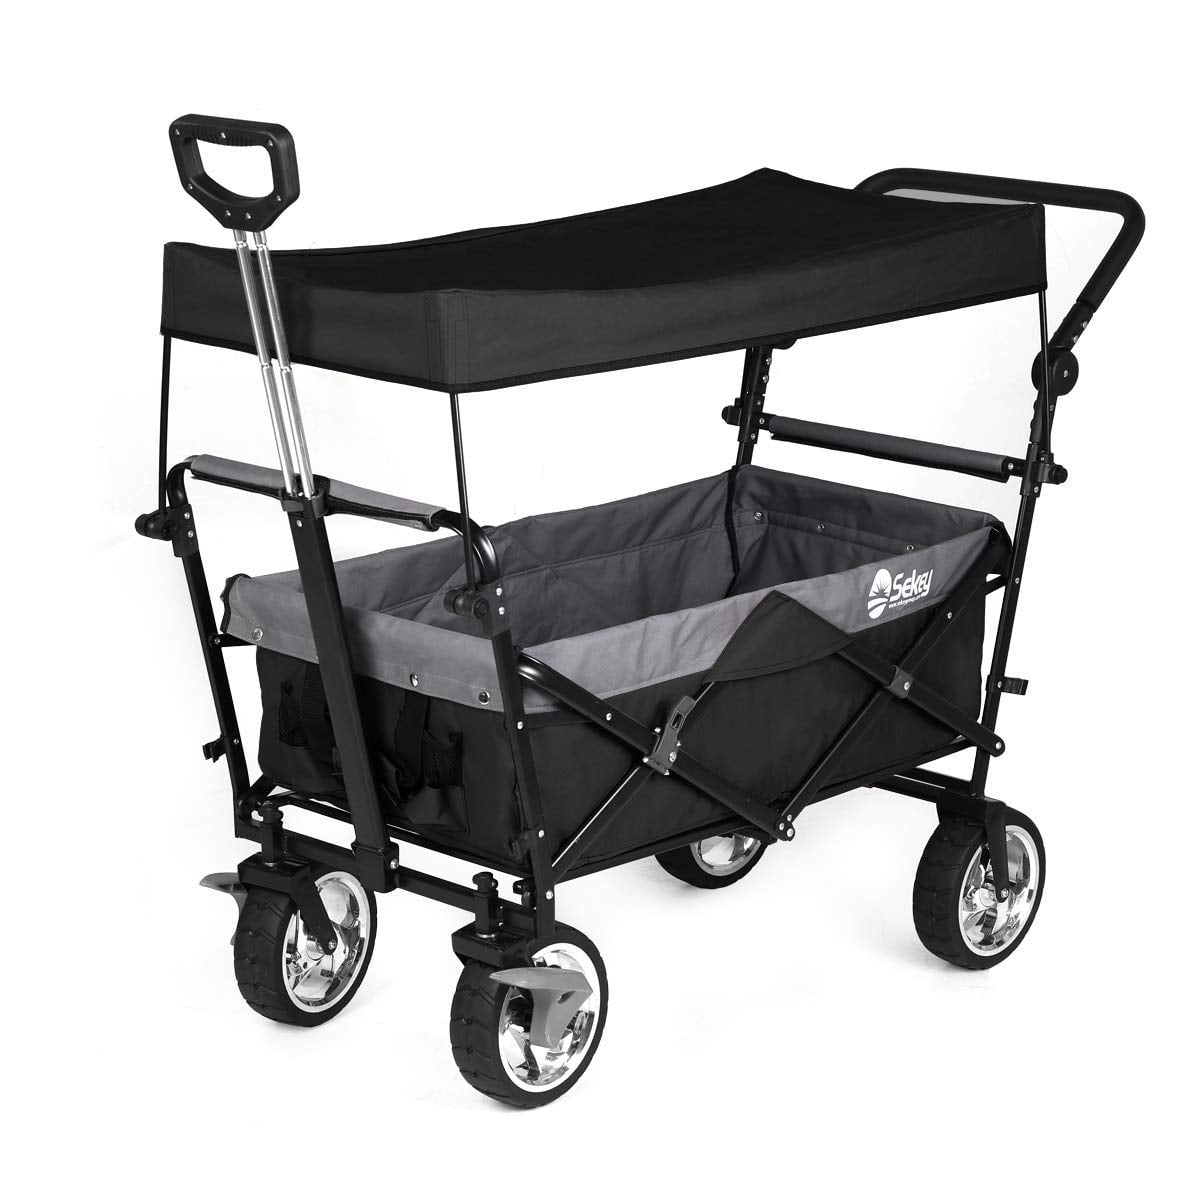 Sekey Folding Wagon with Canopy Collapsible Outdoor Utility Wagon with  Telescopic Push Bar Camping Wagon, Heavy-Duty Wheels with Brakes, Black